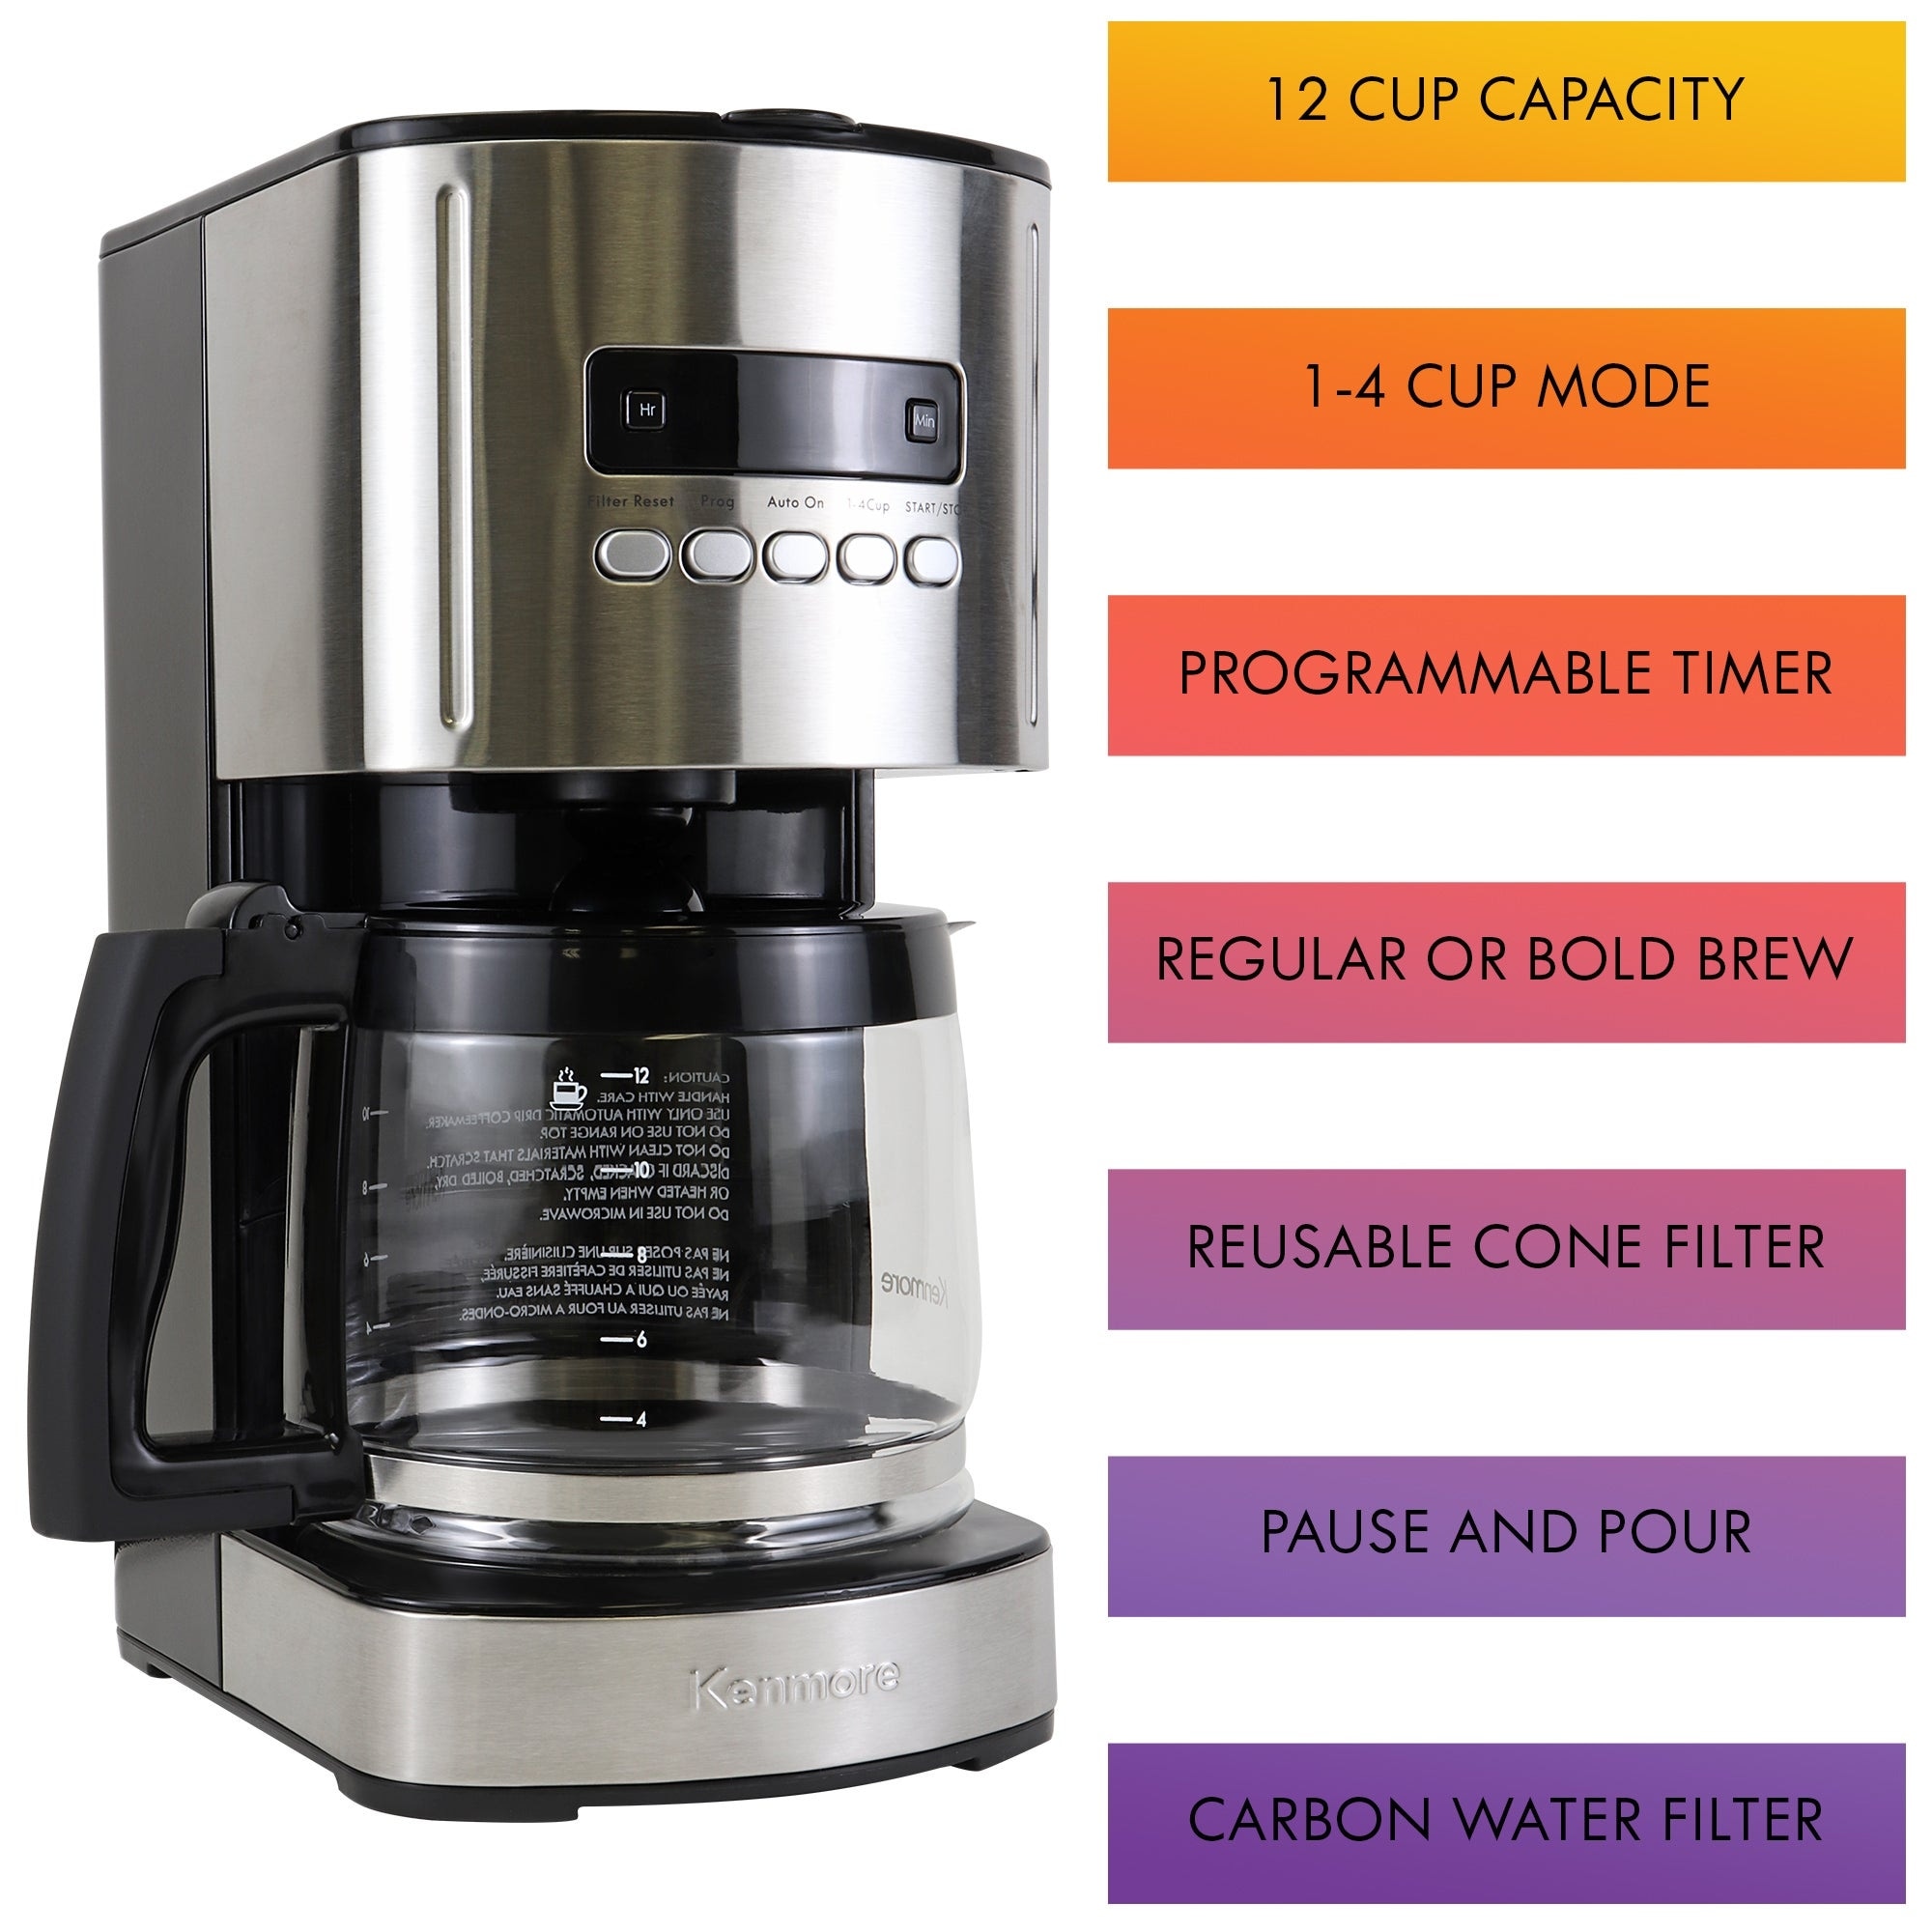 Kenmore Aroma Control 12-Cup Programmable Coffee Maker, Black and Stainless  Steel, Reusable Filter - On Sale - Bed Bath & Beyond - 35056697